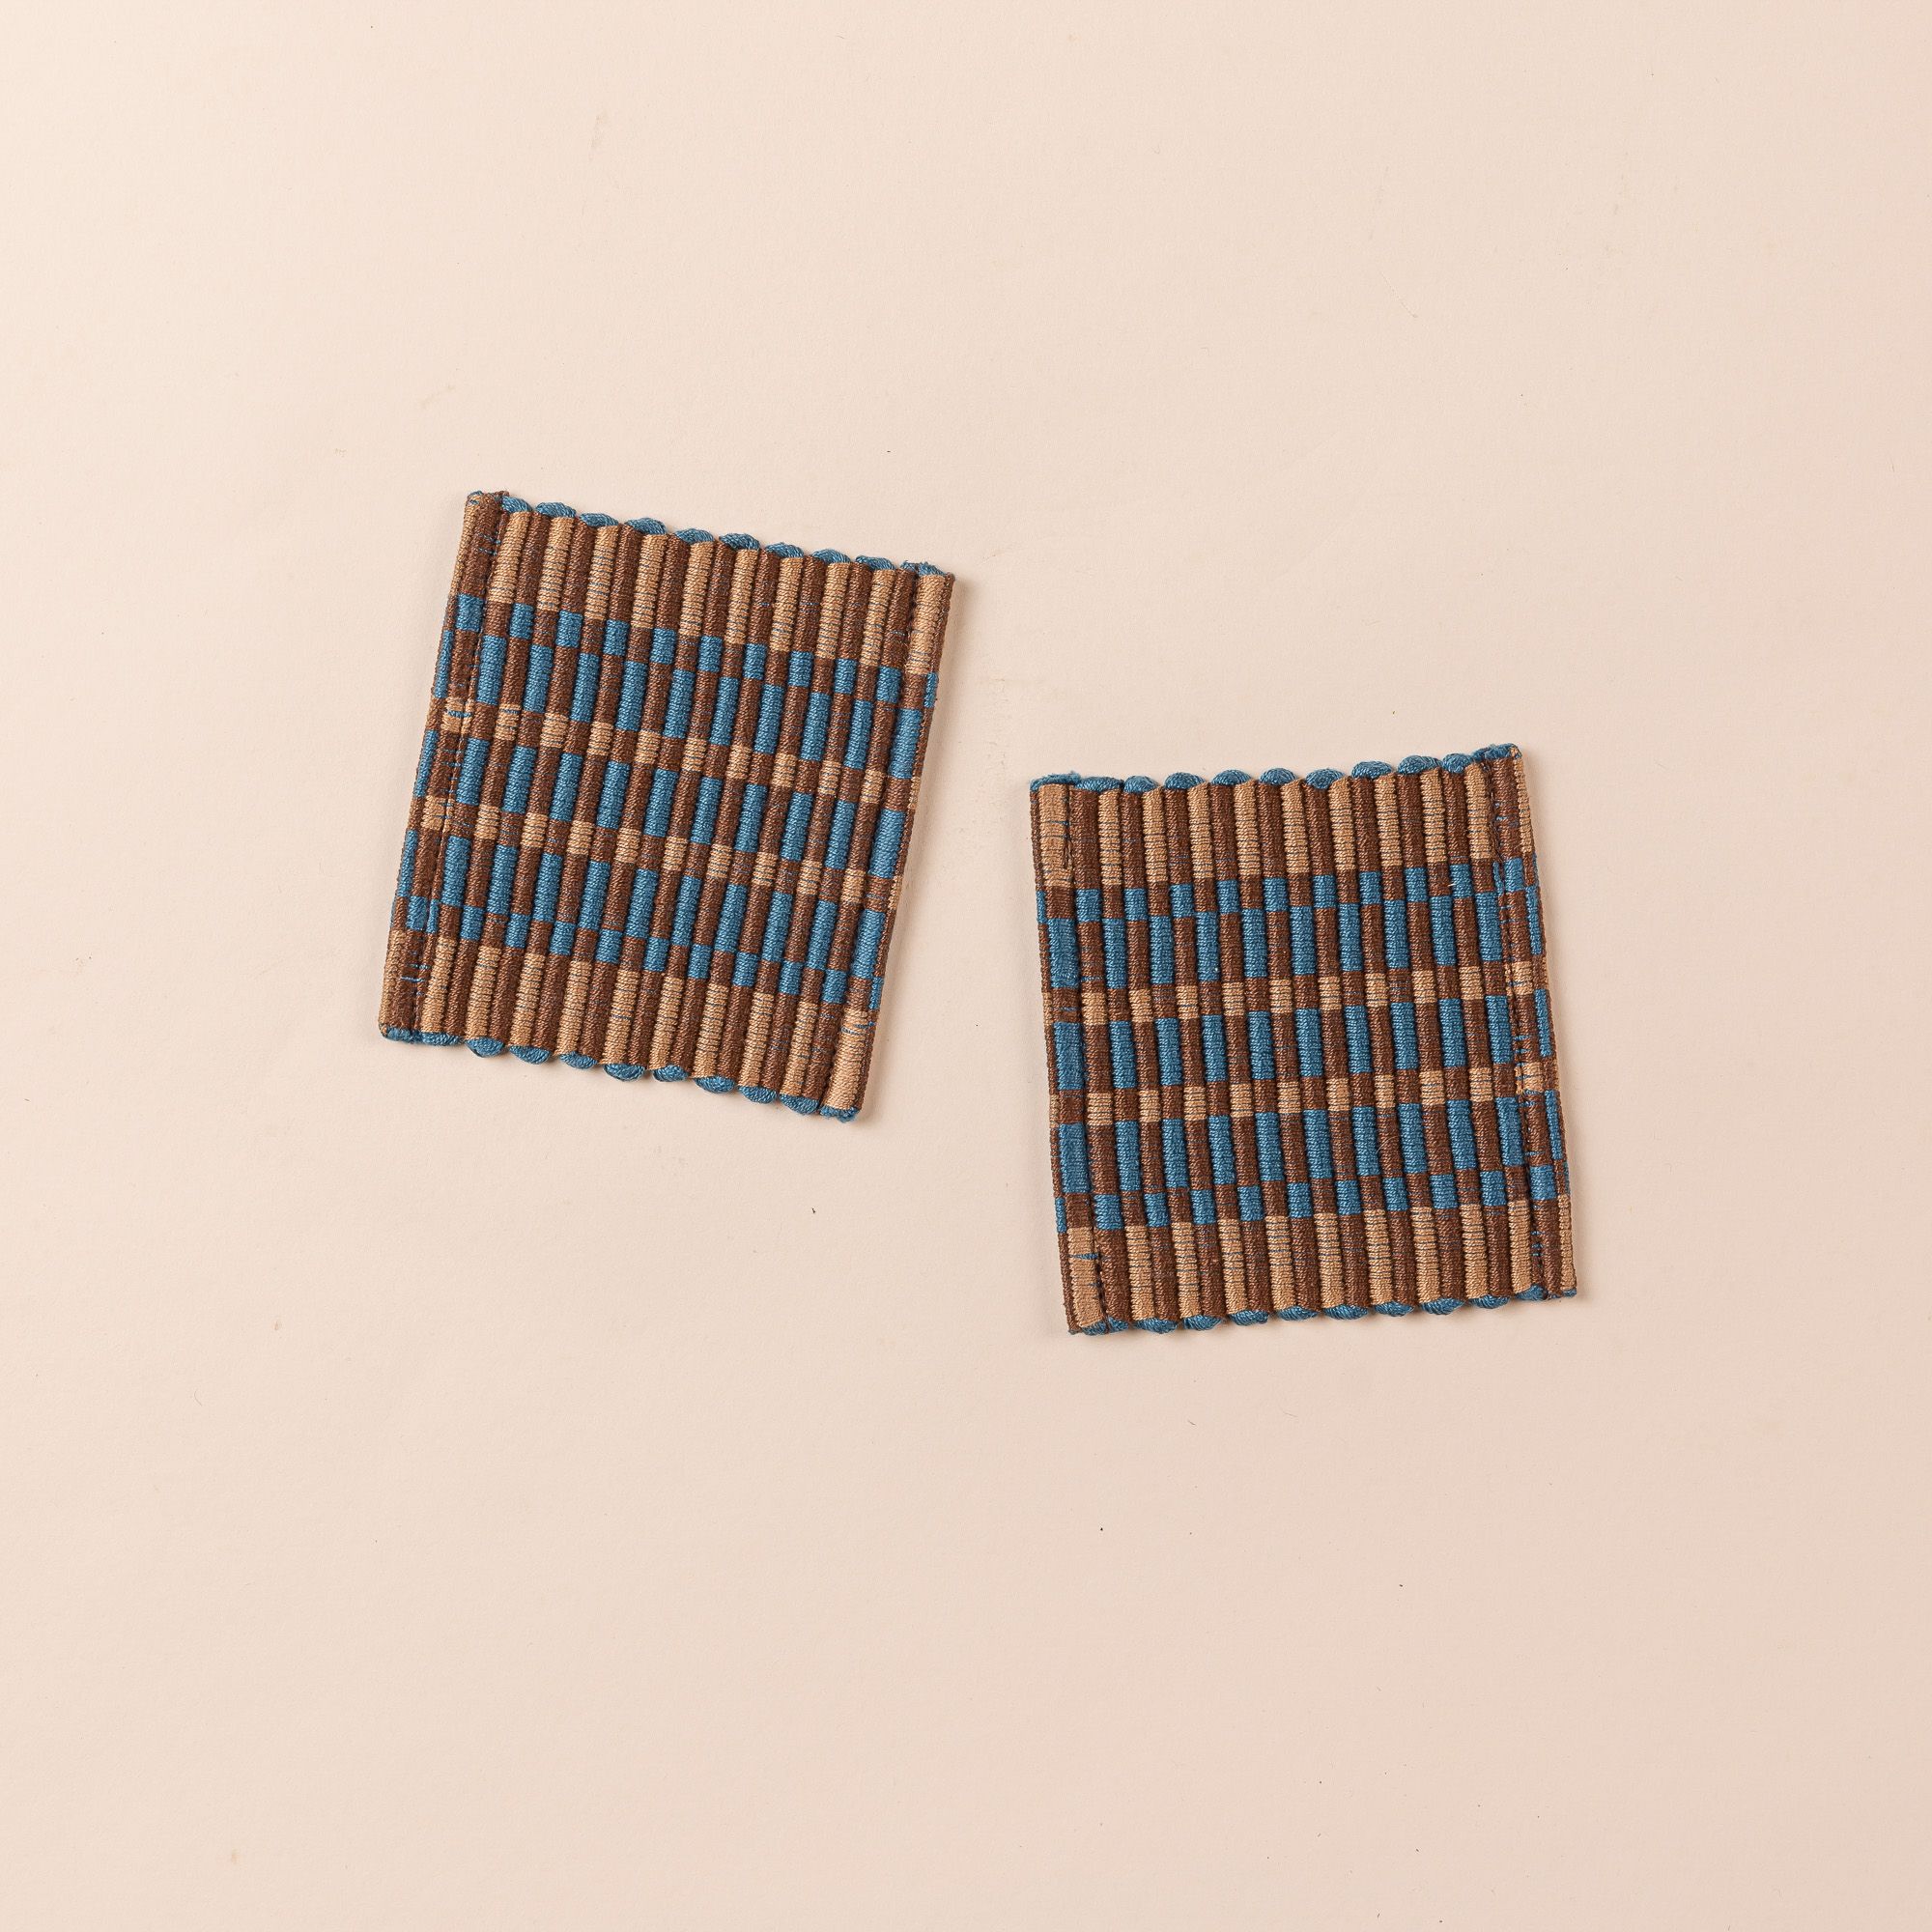 Two square coasters that are hand woven in a striped rectangular grid design in brown, tan, and blue colors